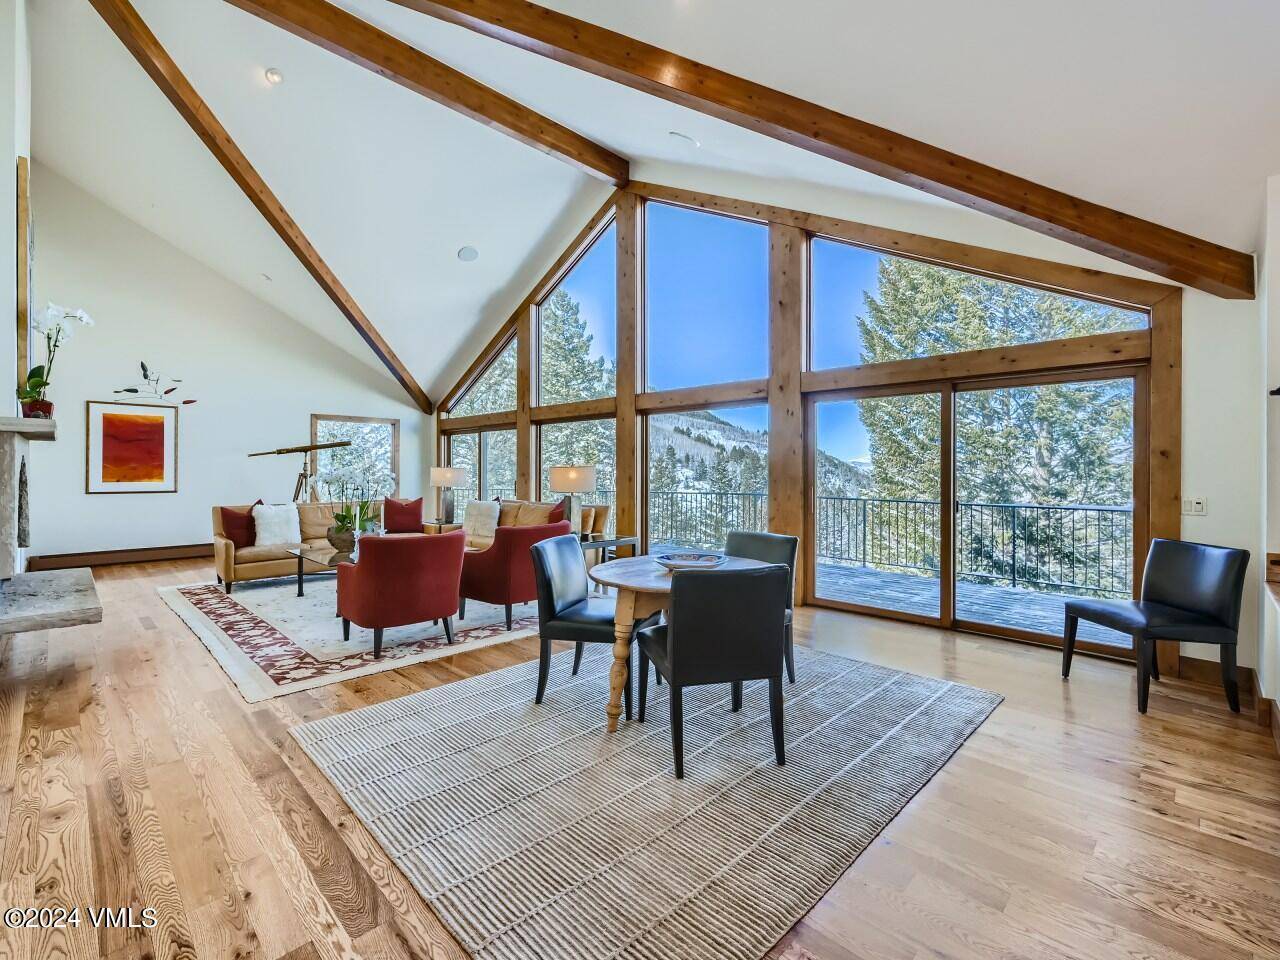 Enjoy expansive mountain valley views from this beautiful, private 5 BR 4.